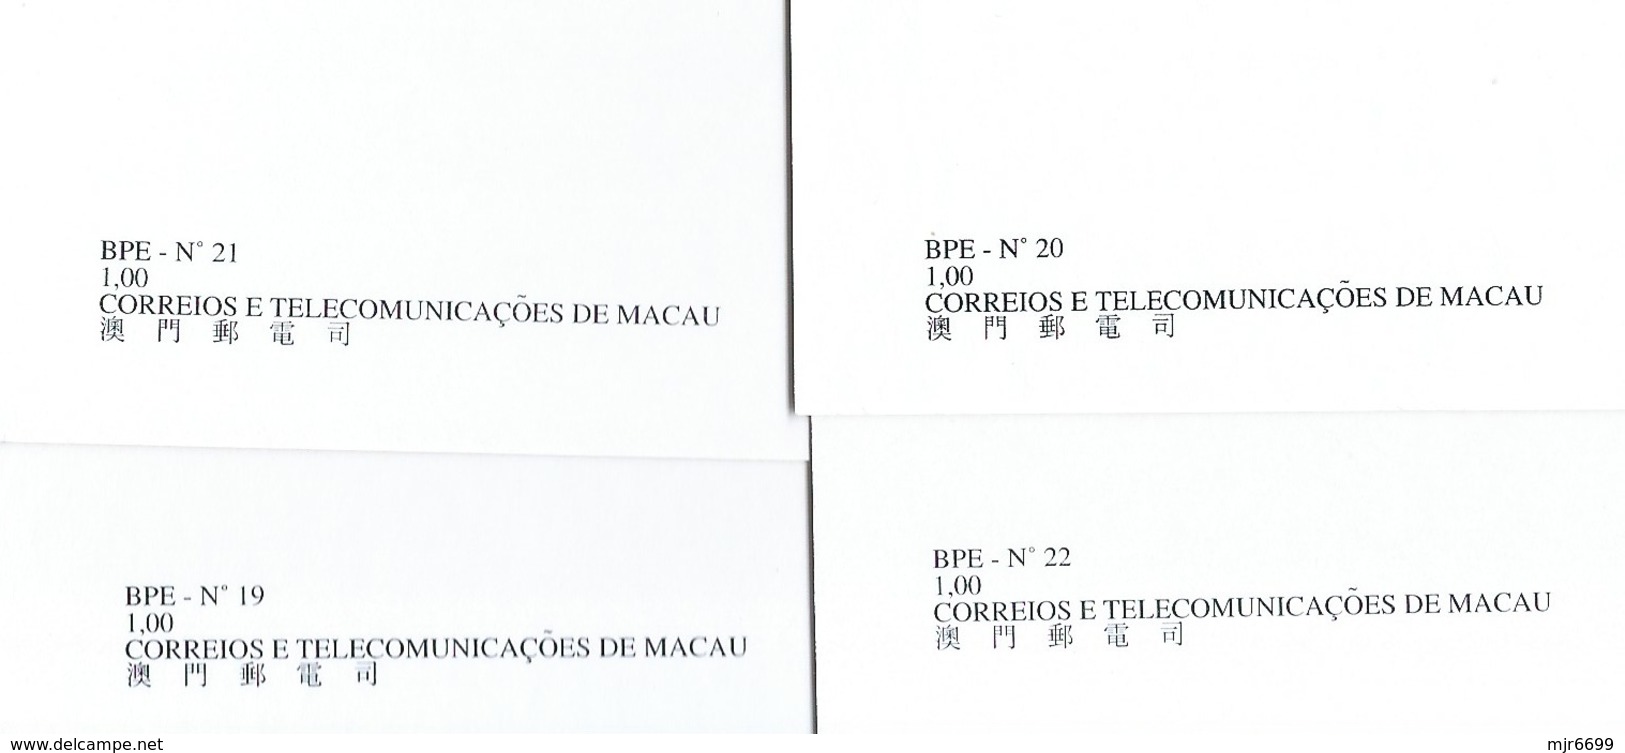 PORTUGAL MACAU 1996 MACAU SECURITY FORCE DAY COMM SPECIAL POST CARDS  POST OFFICE CTT PRINT - Macao